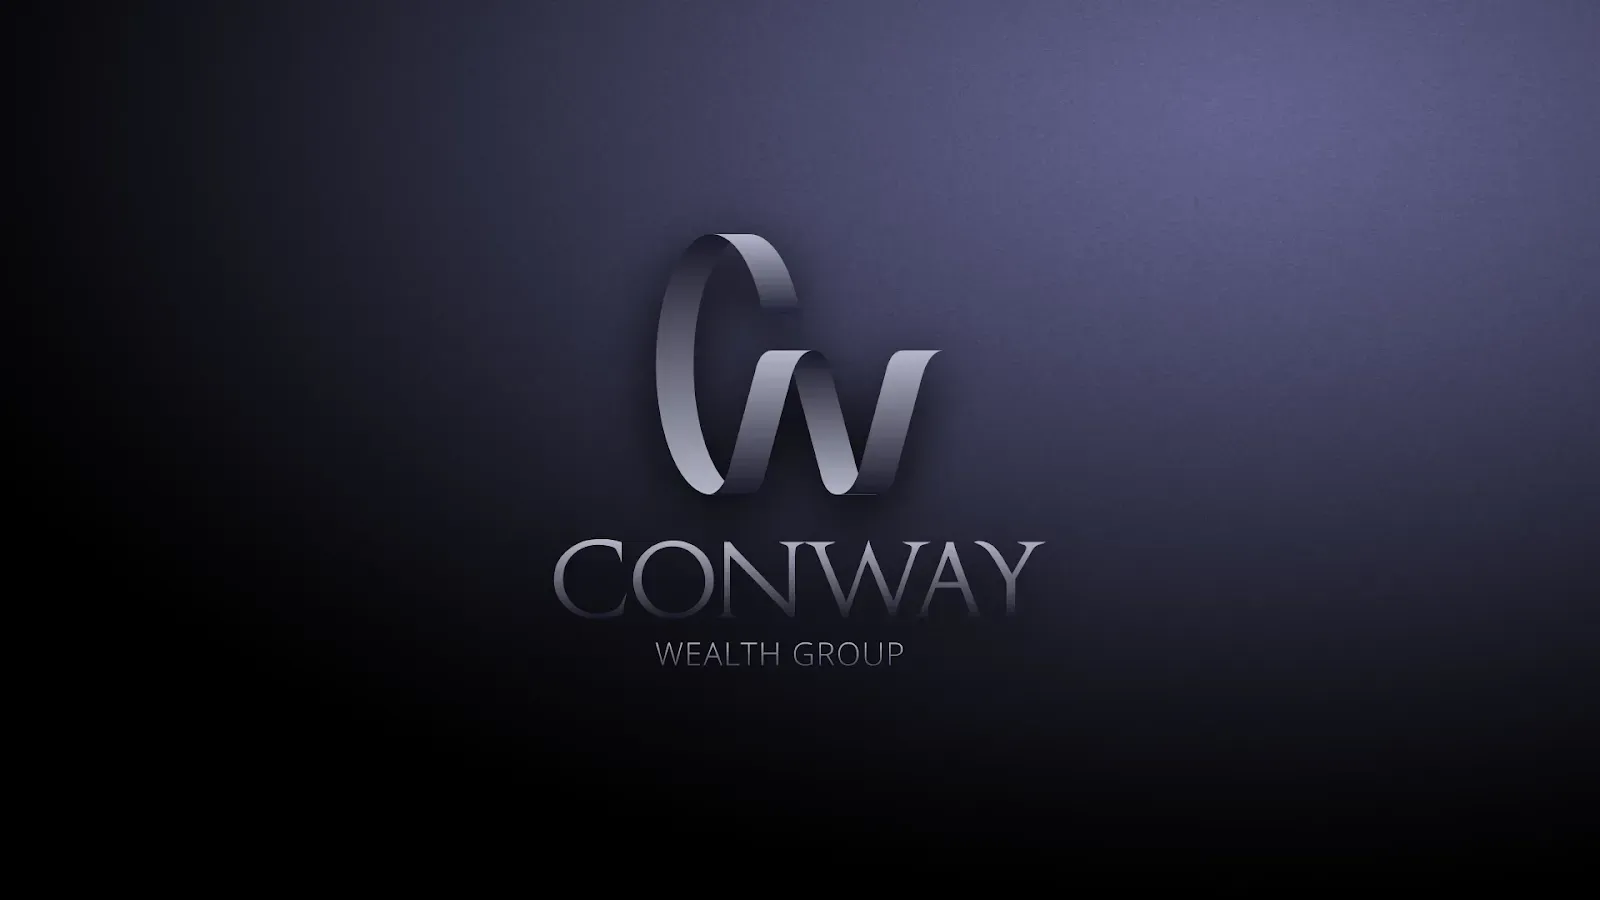 Logo Design: Conway - Wealth Group